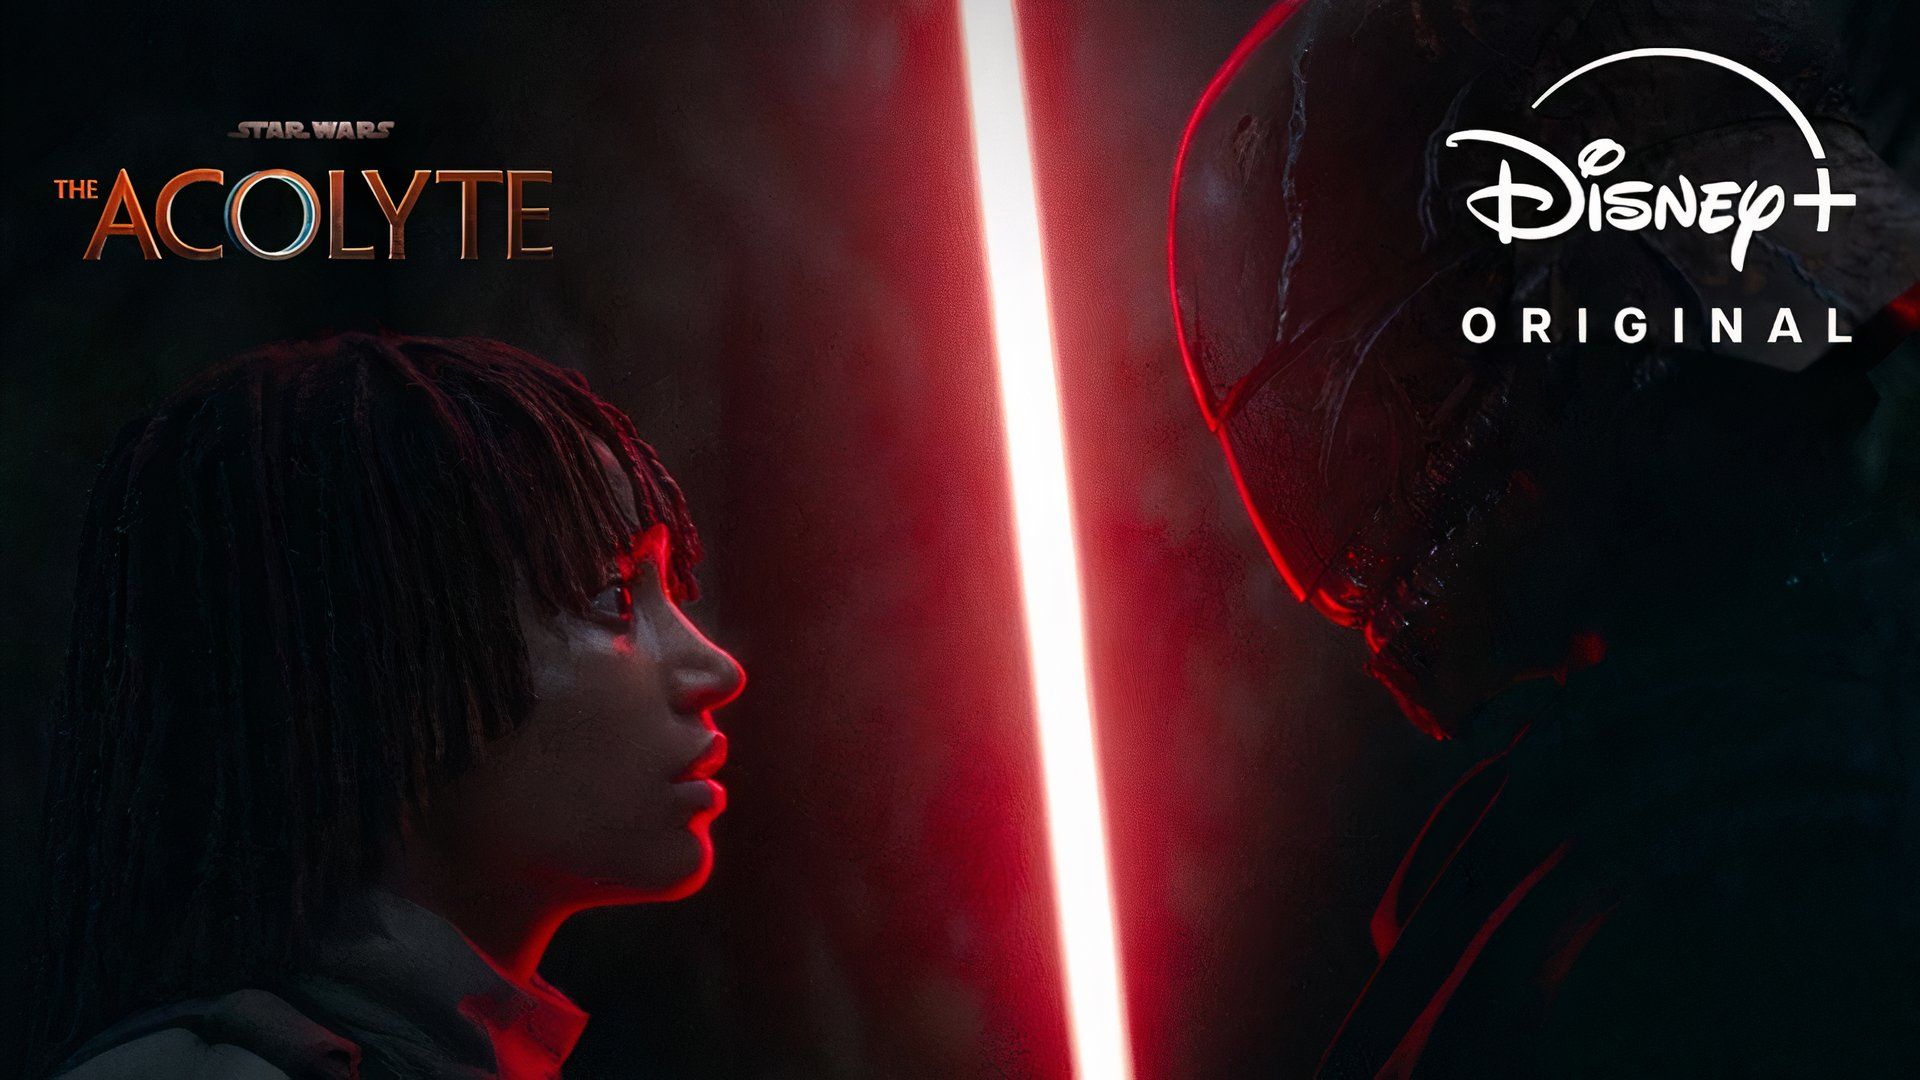 Star Wars The Acolyte Official 'Awake' Teaser Trailer